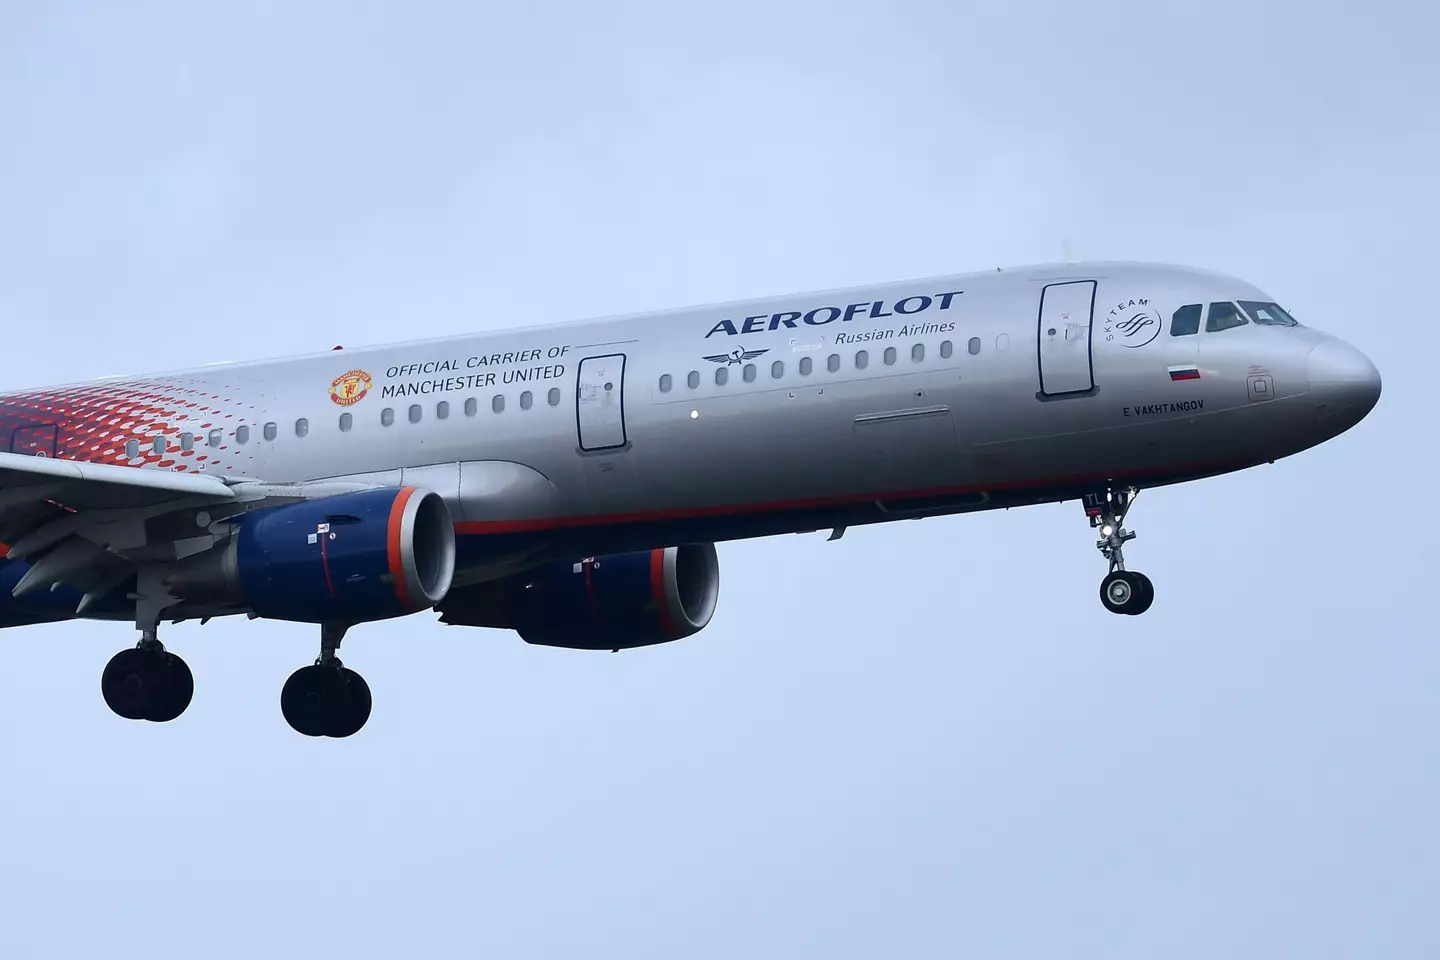 United have often flown with Aeroflot. Image: PA Images